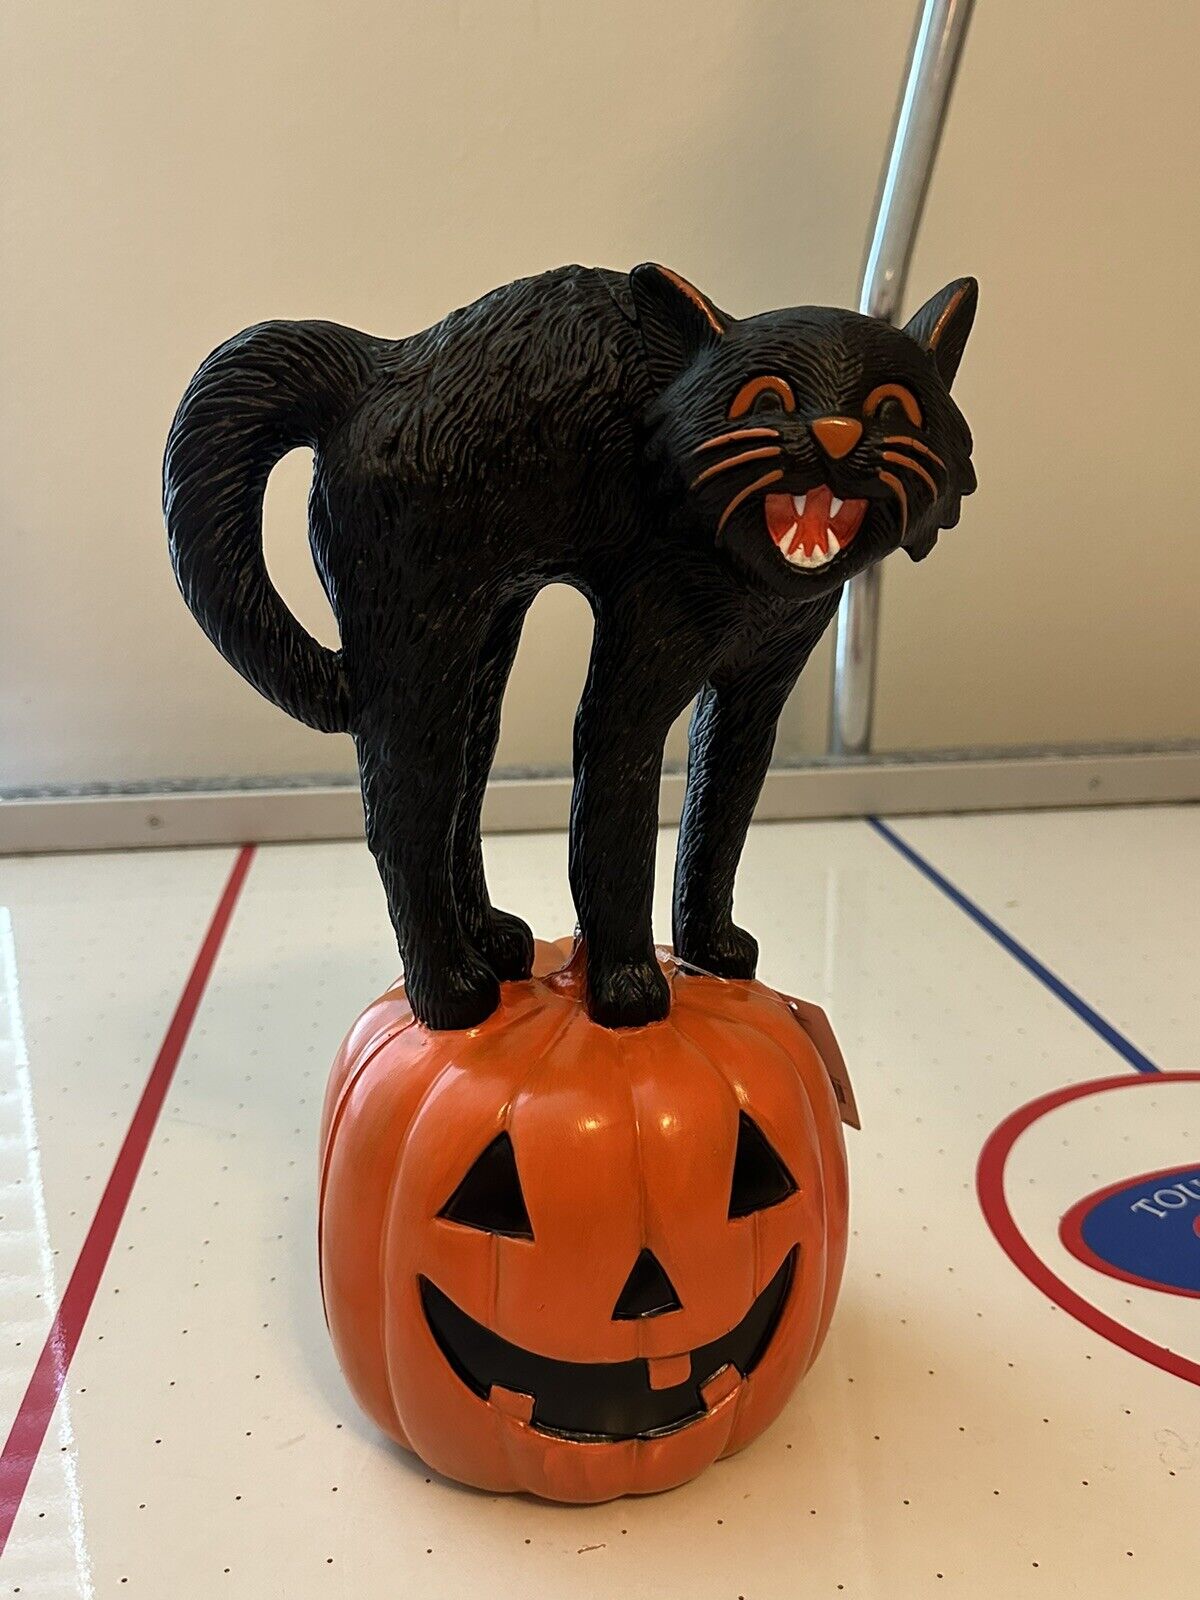 At Home - Black Cat on Pumpkin Blow Mold Vintage 80’s Style Halloween Decor New